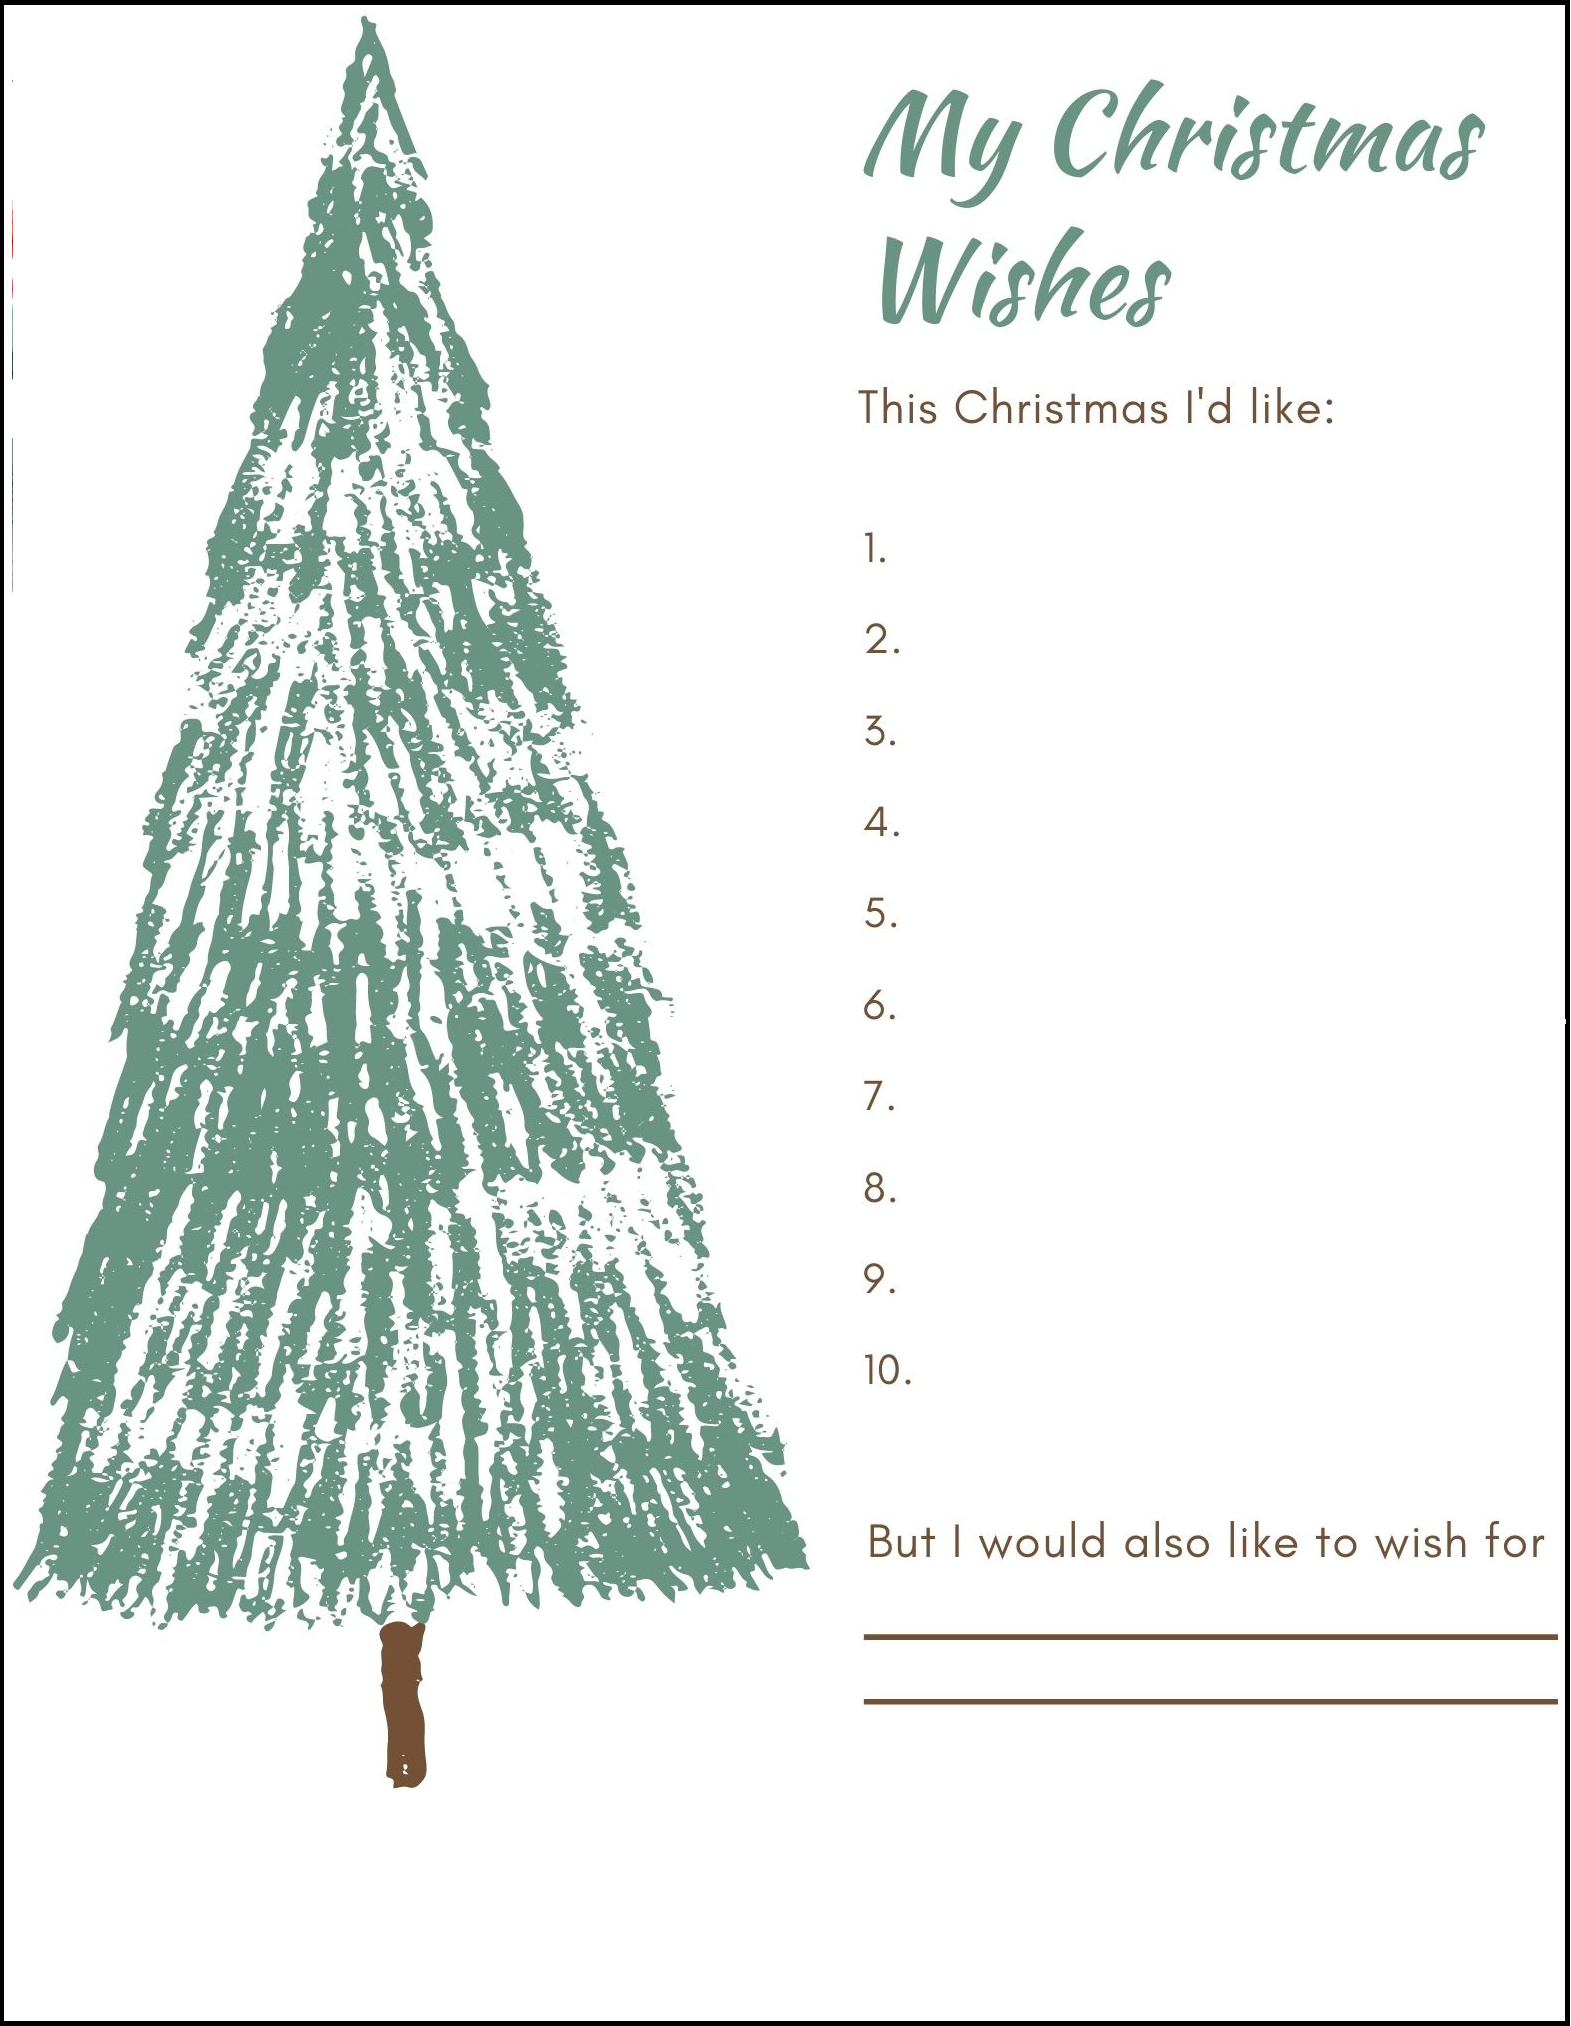 Christmas wish list with large tree drawing on the side